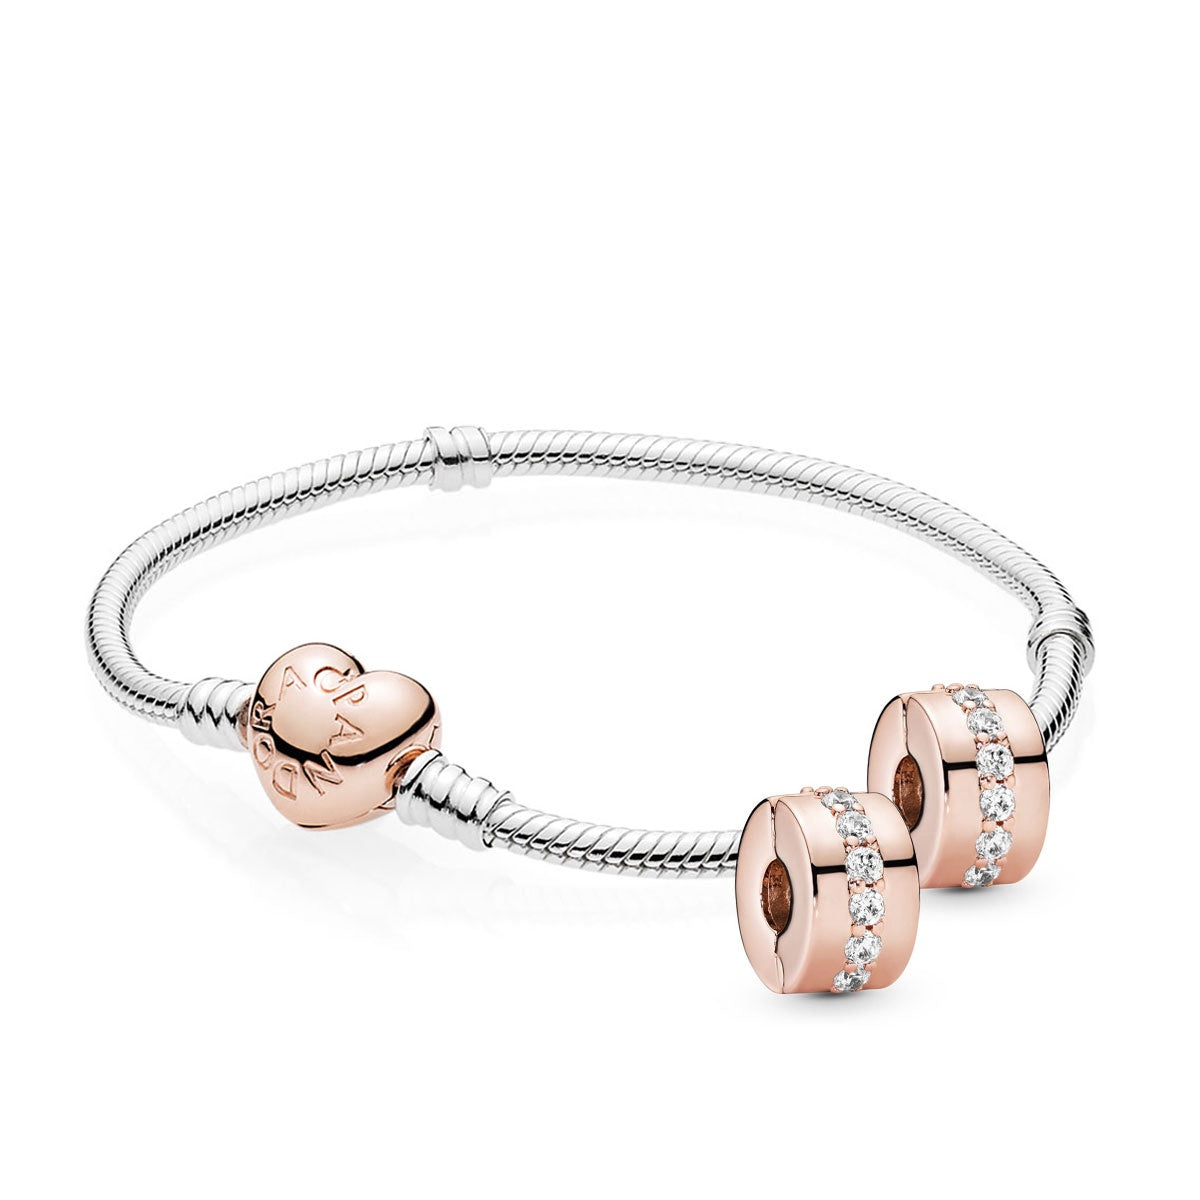 Pandora Iconic Heart Clasp Gift Set (Includes Free Charm)